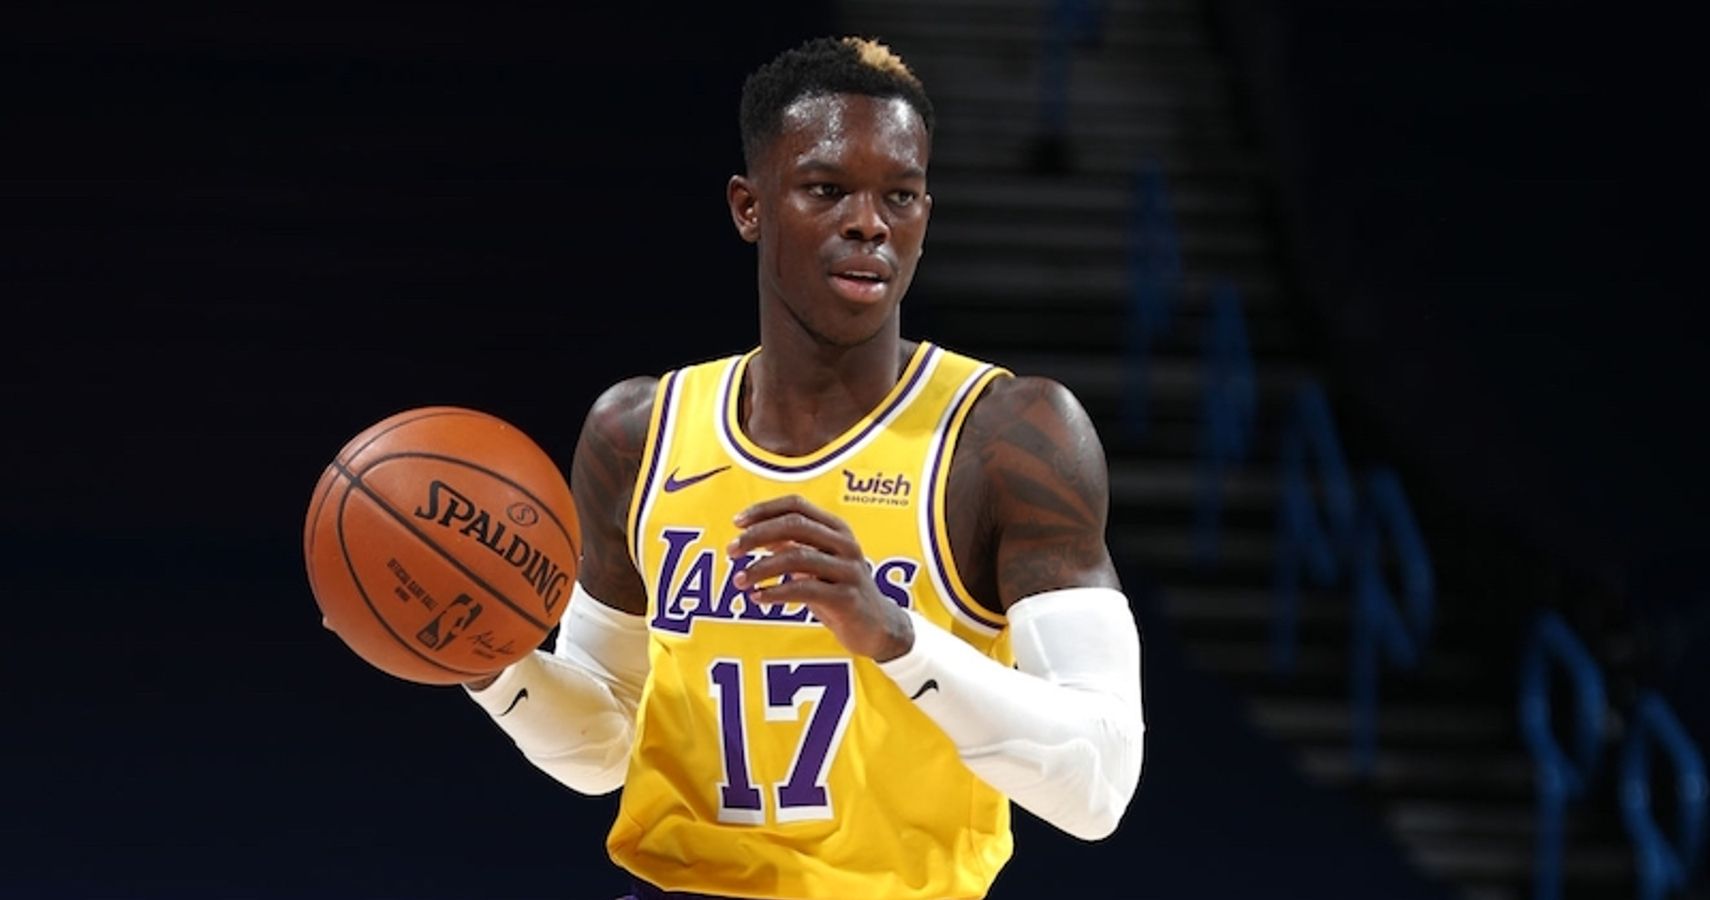 Lakers got their guy at an $81.36 million discount, Dennis